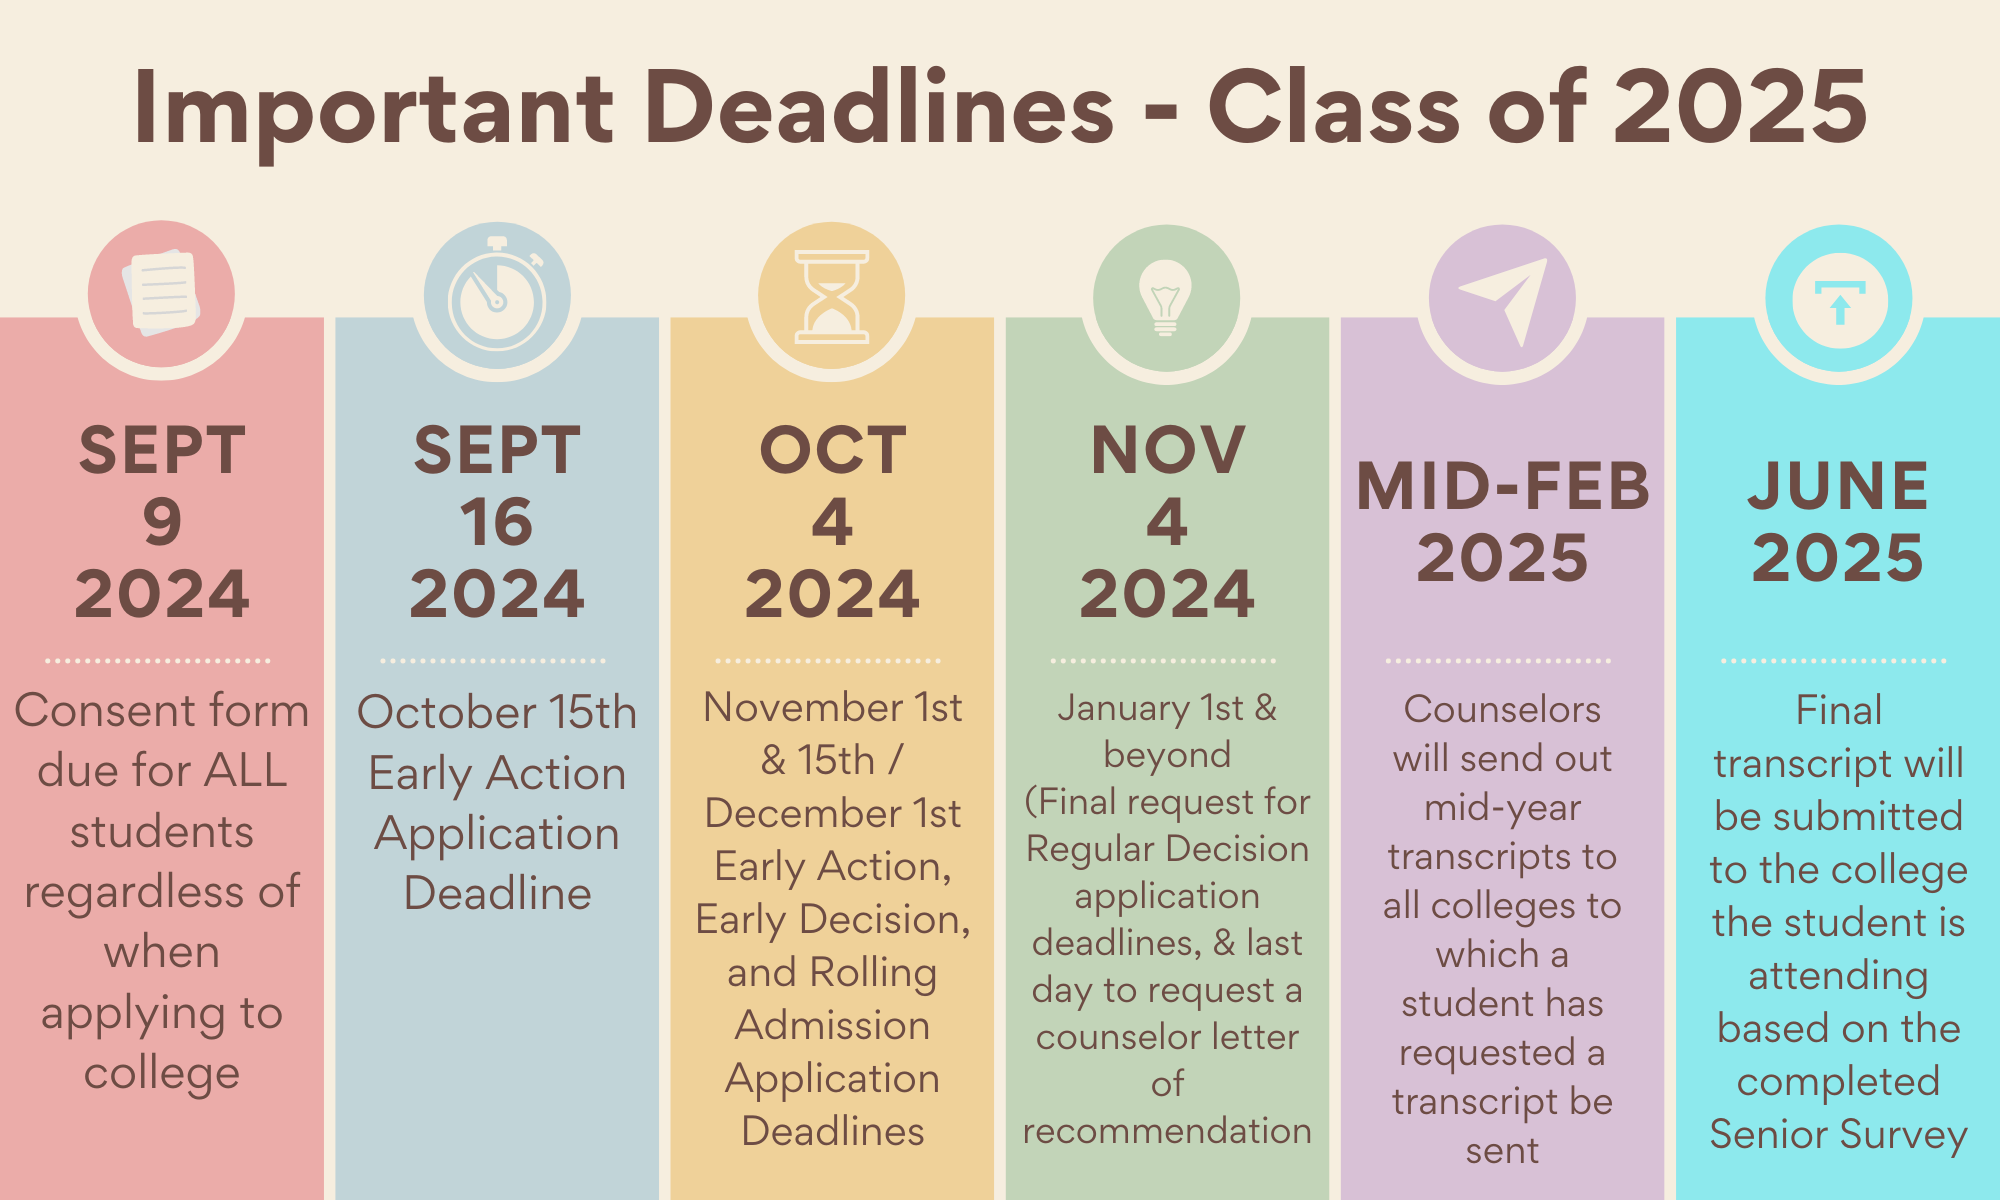 Important Deadlines for Class of 2025